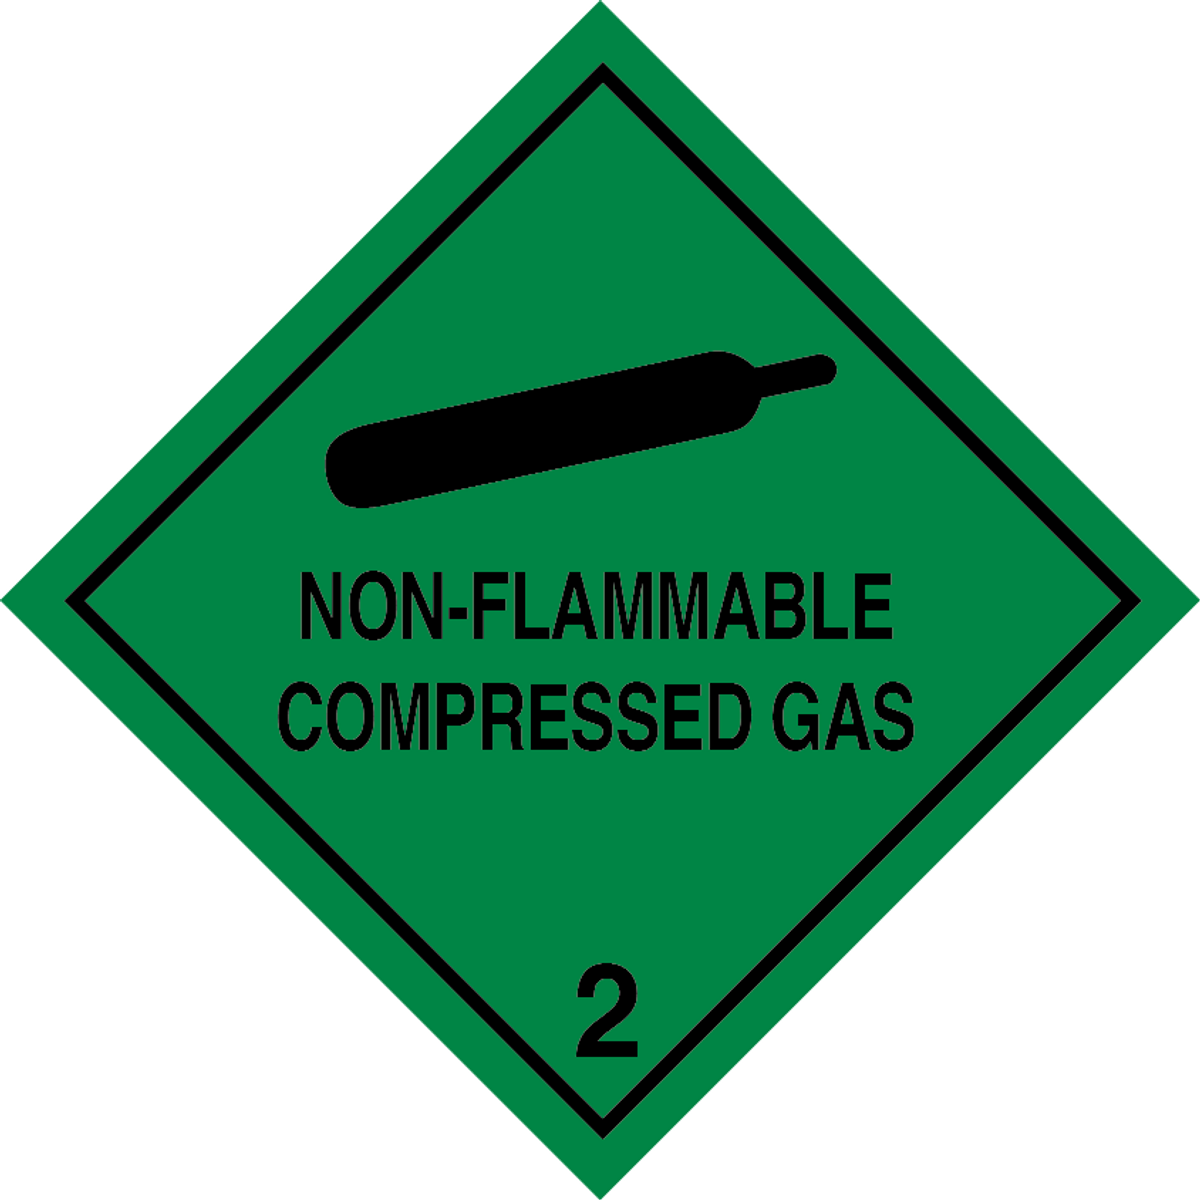 Class 2.2 non flammable compressed gas label